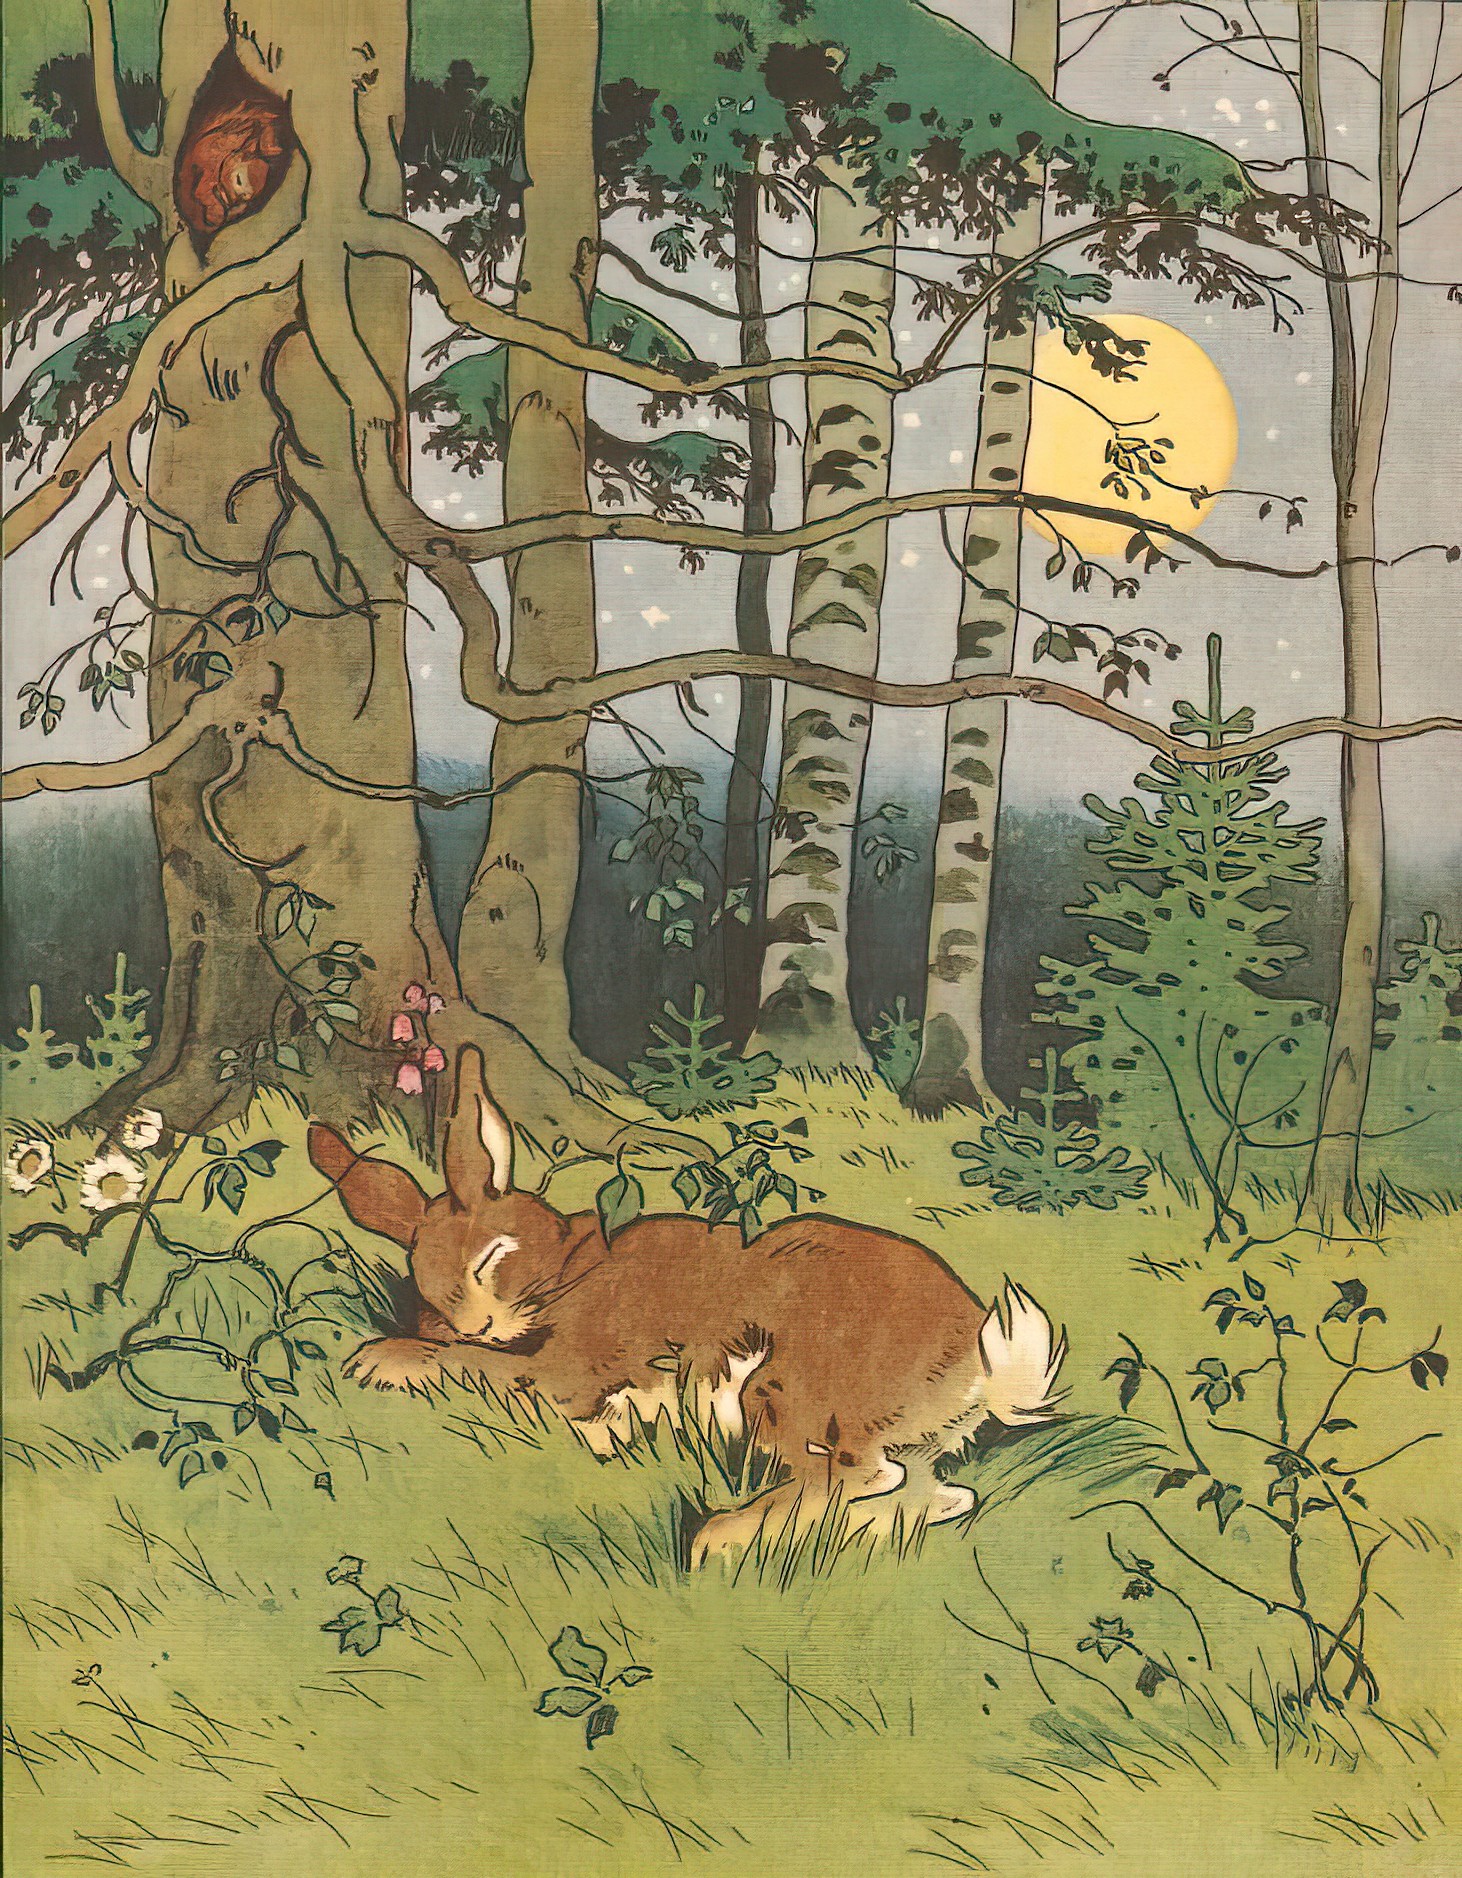 Fritz Baumgarten (1883-1966), Easter Bunny card. Someone's not getting their eggs delivered tonight. Or maybe bunny's exhausted from delivering all those eggs the night before?